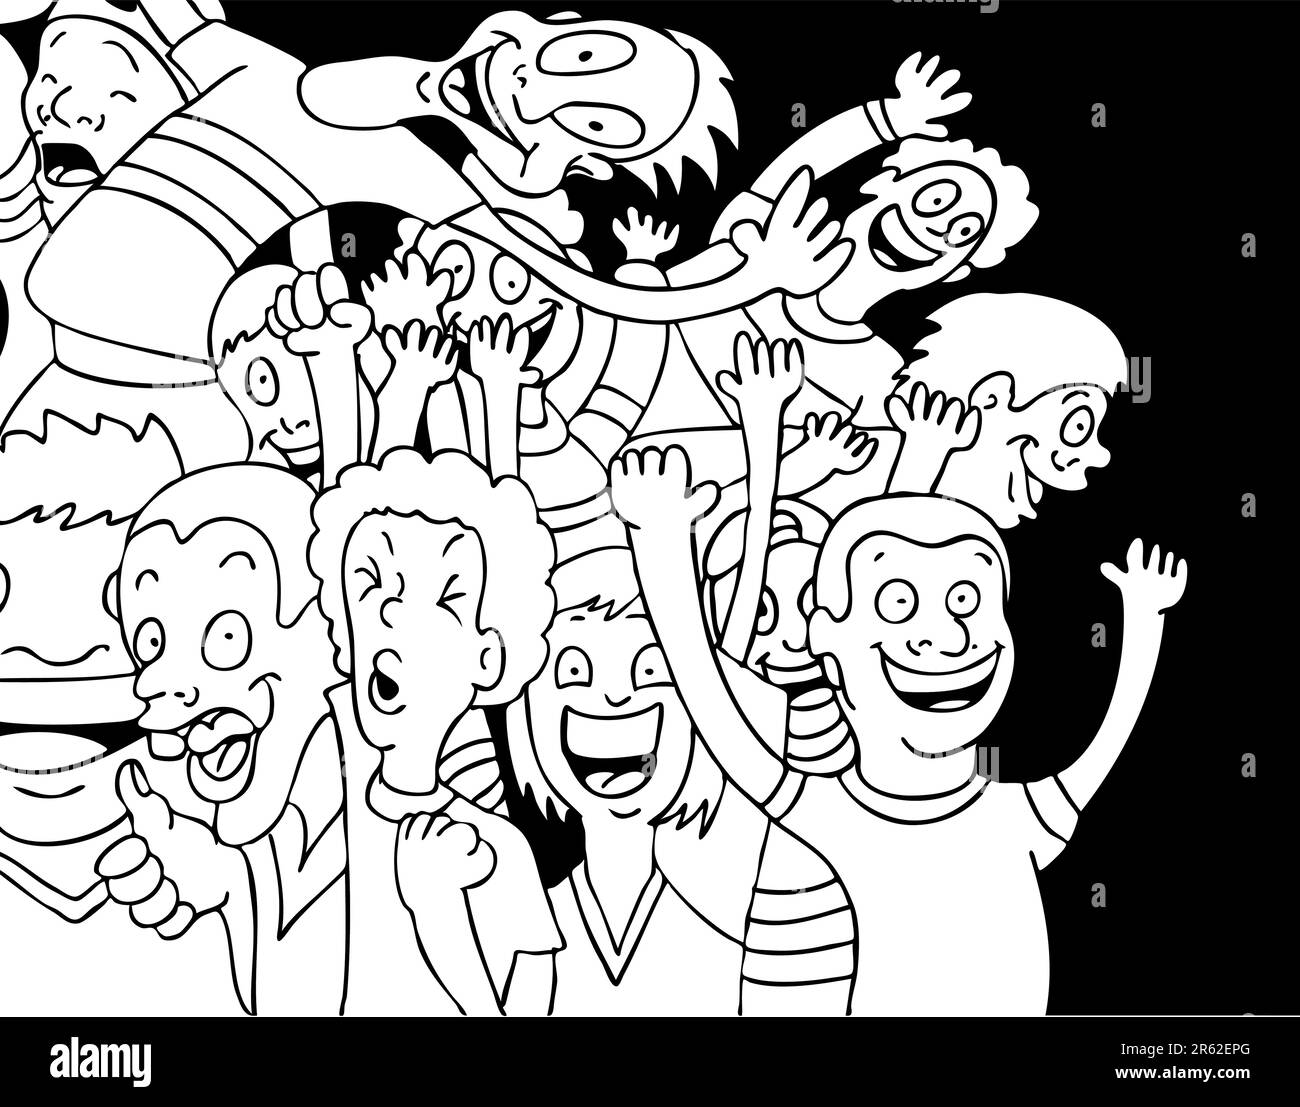 Cartoon of people screaming and shouting with excitement. Stock Vector